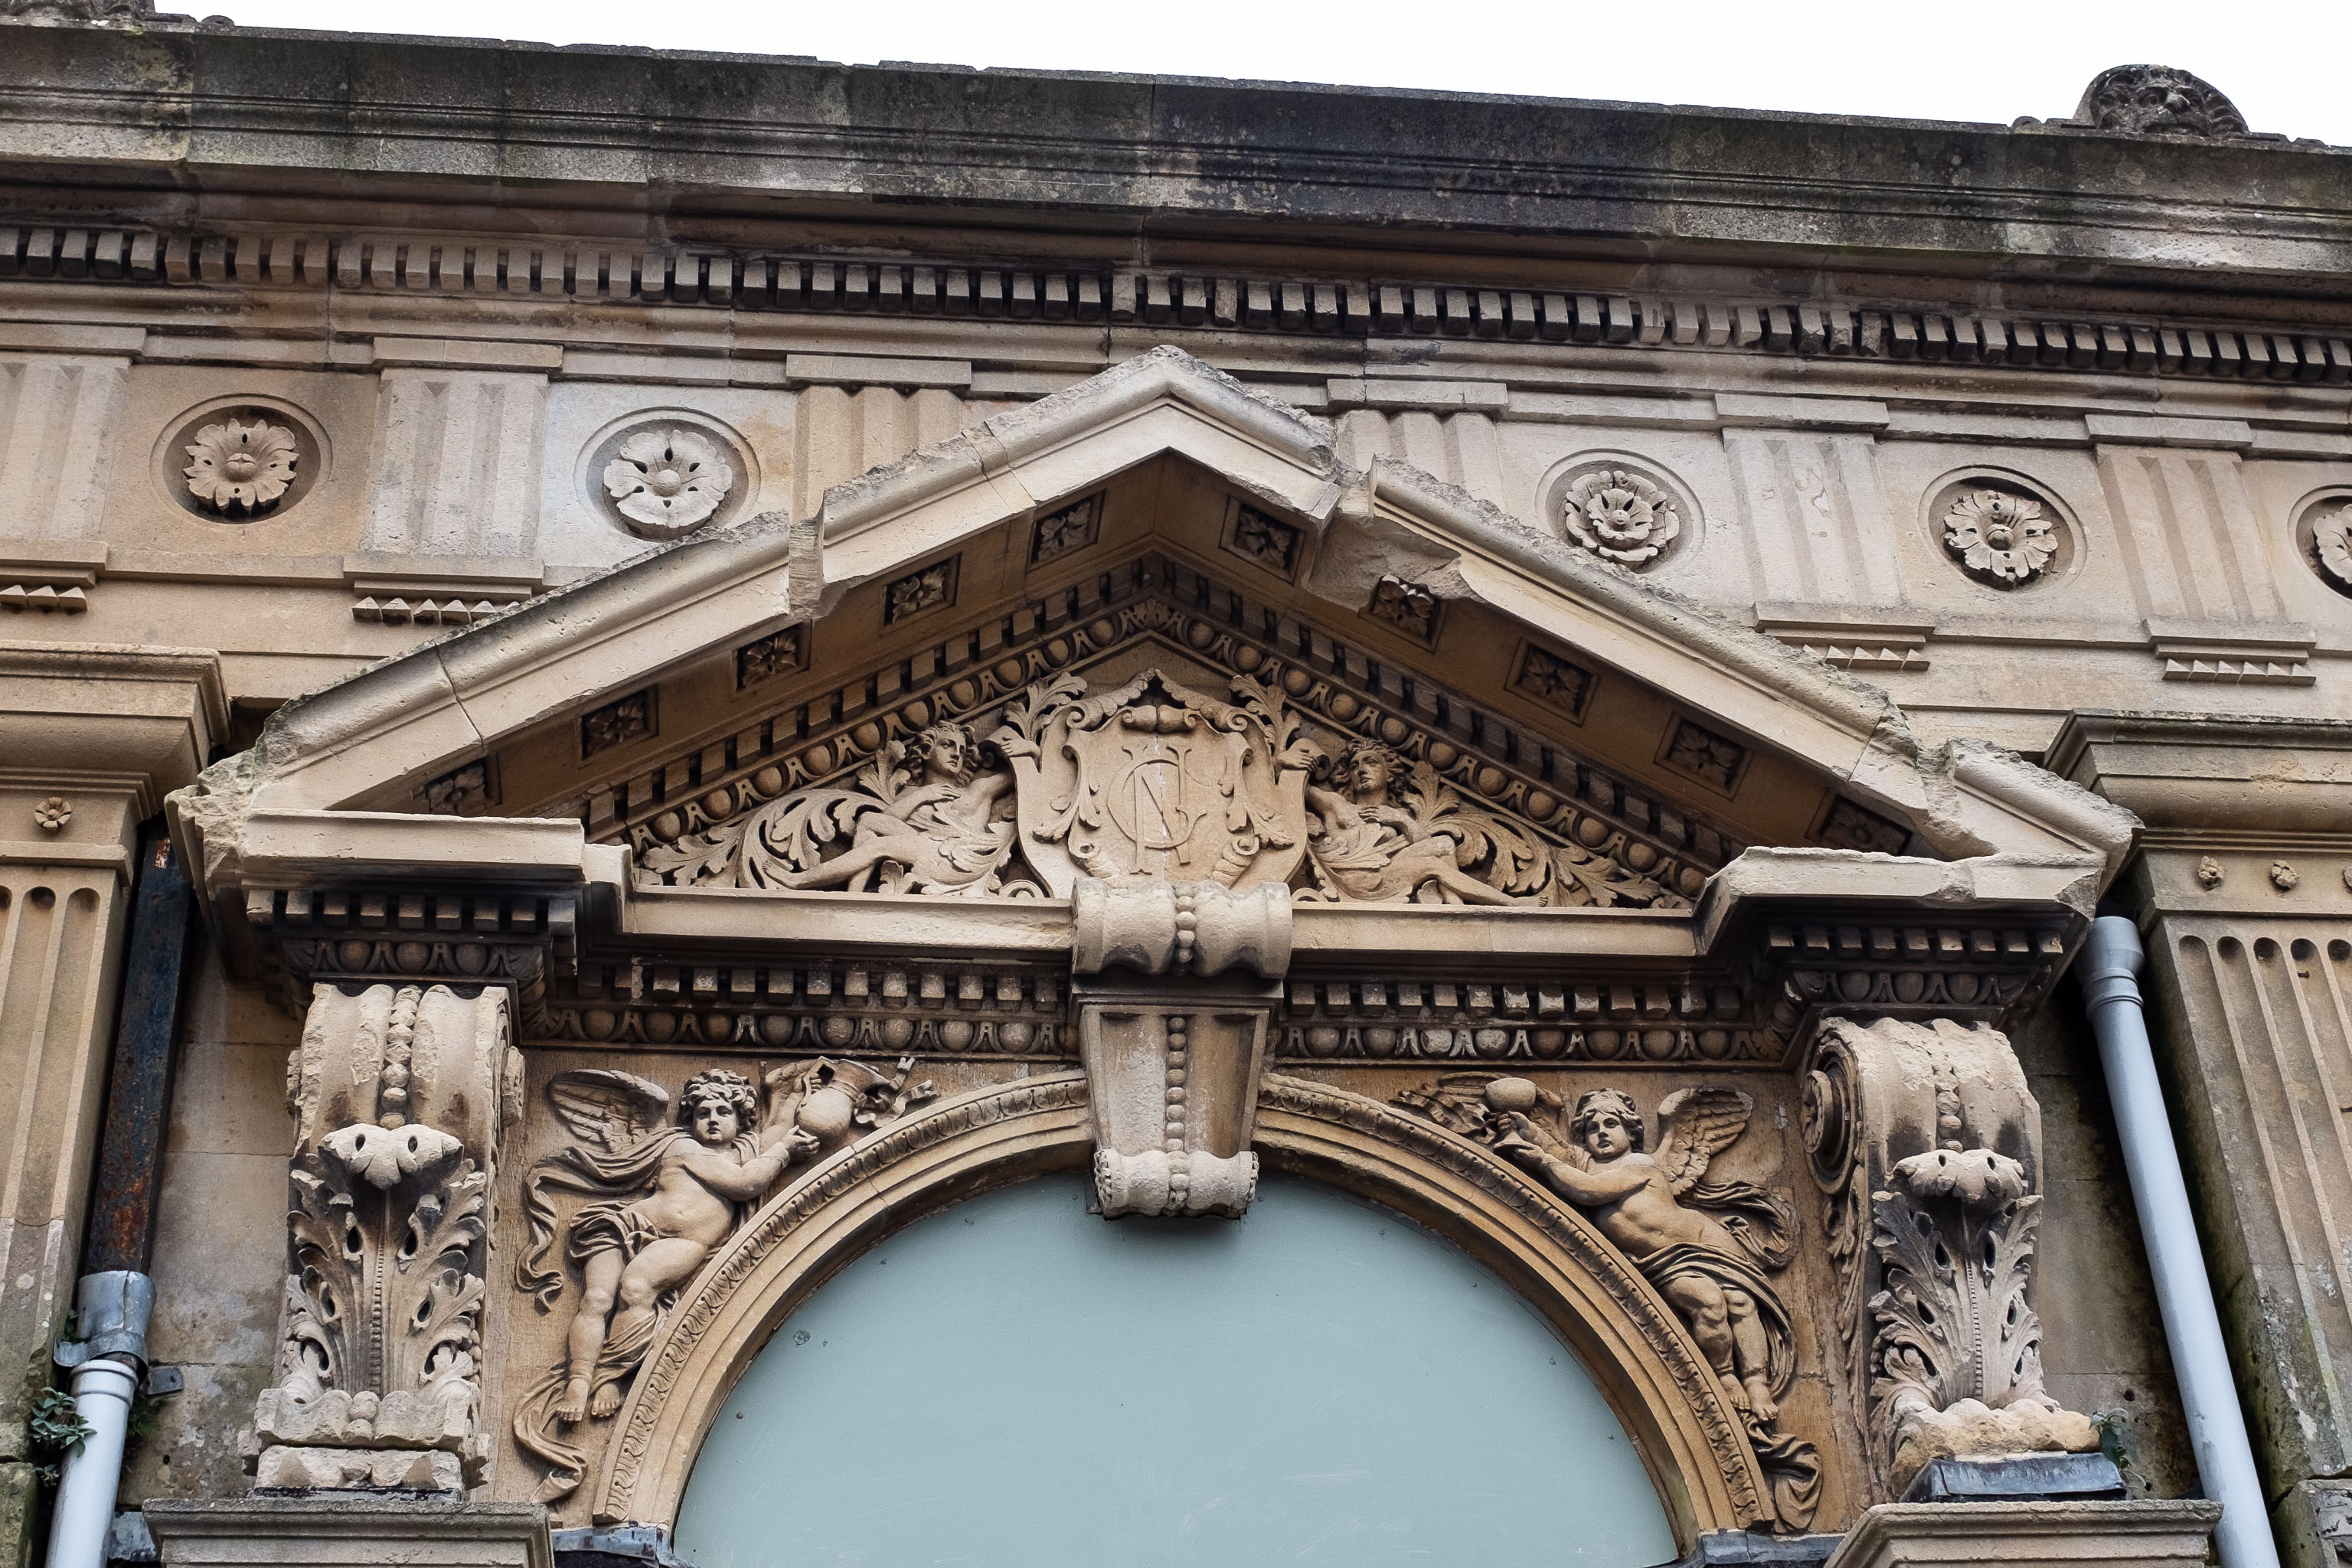 George Newnes
"Built 1894, designed by Philip Monro for Sir George Newnes, the promoter of the scheme", hence the GN in the pediment. He also funded the Clifton...